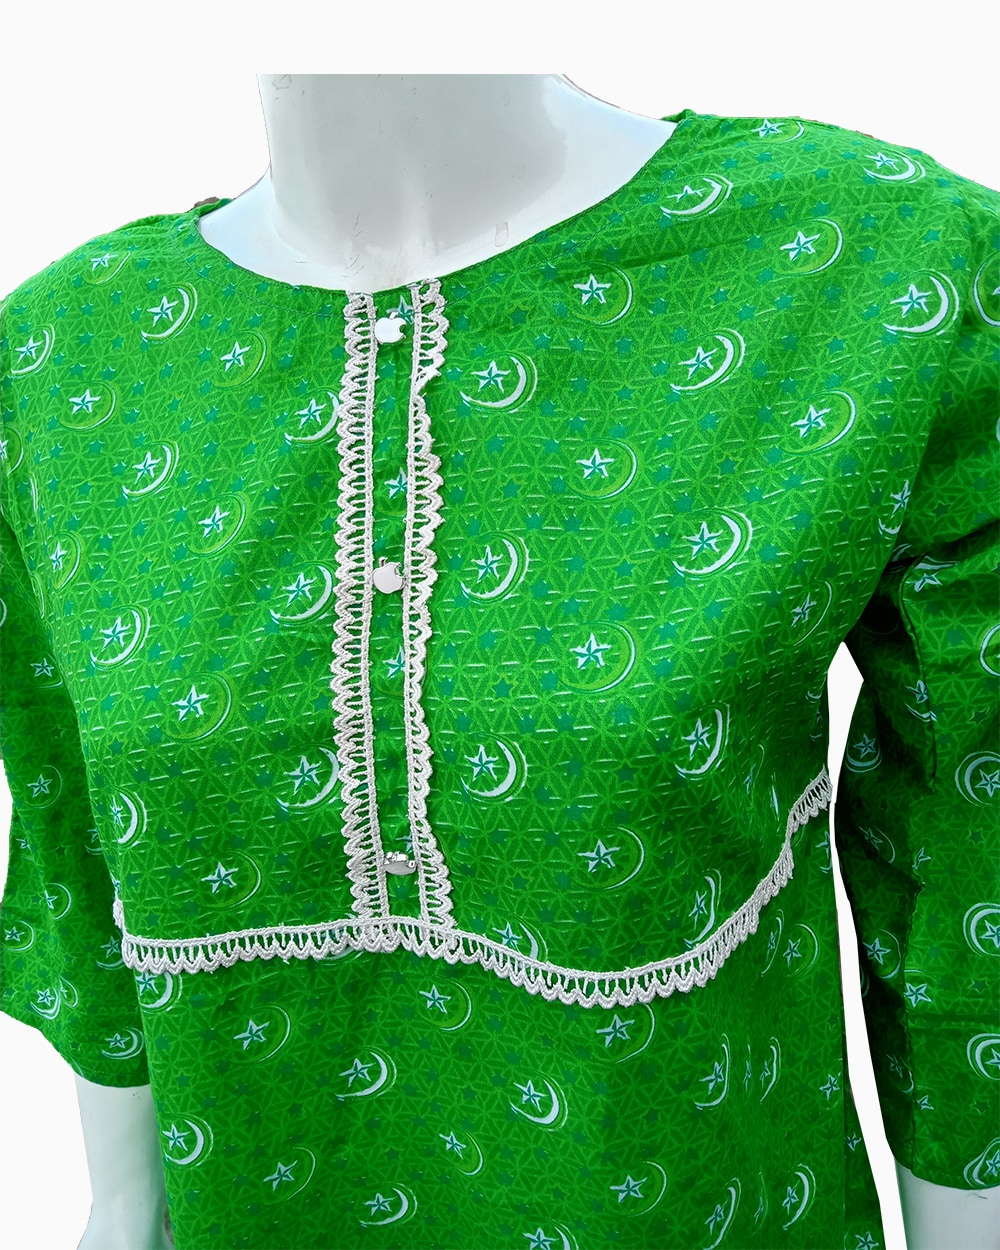 independence day green kurti online - 2